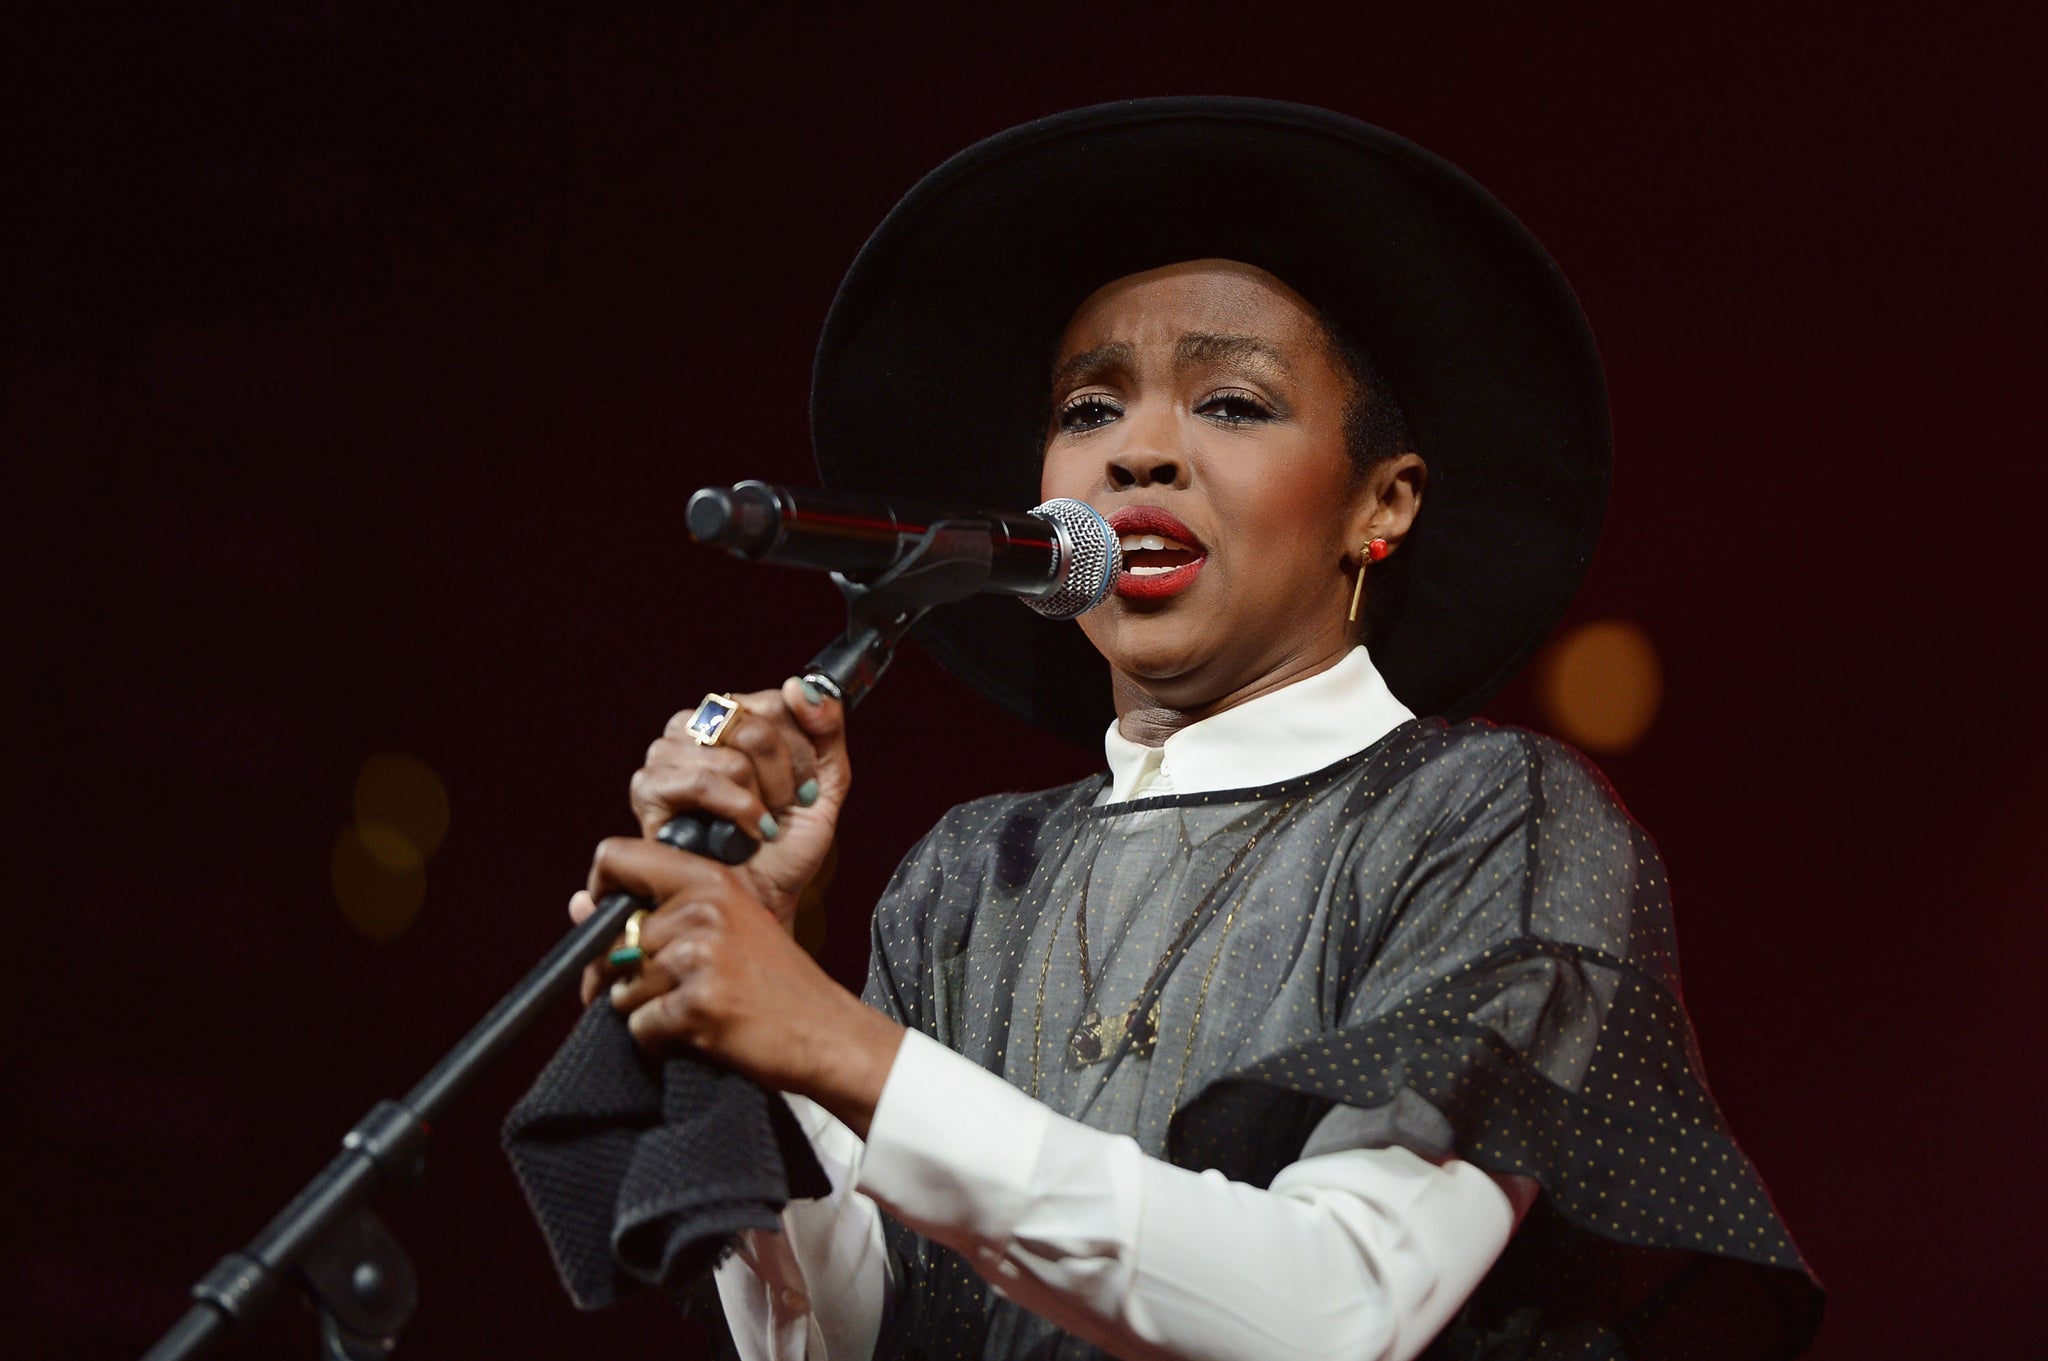 Lauryn Hill performs on stage at the Amnesty International Concert in New York